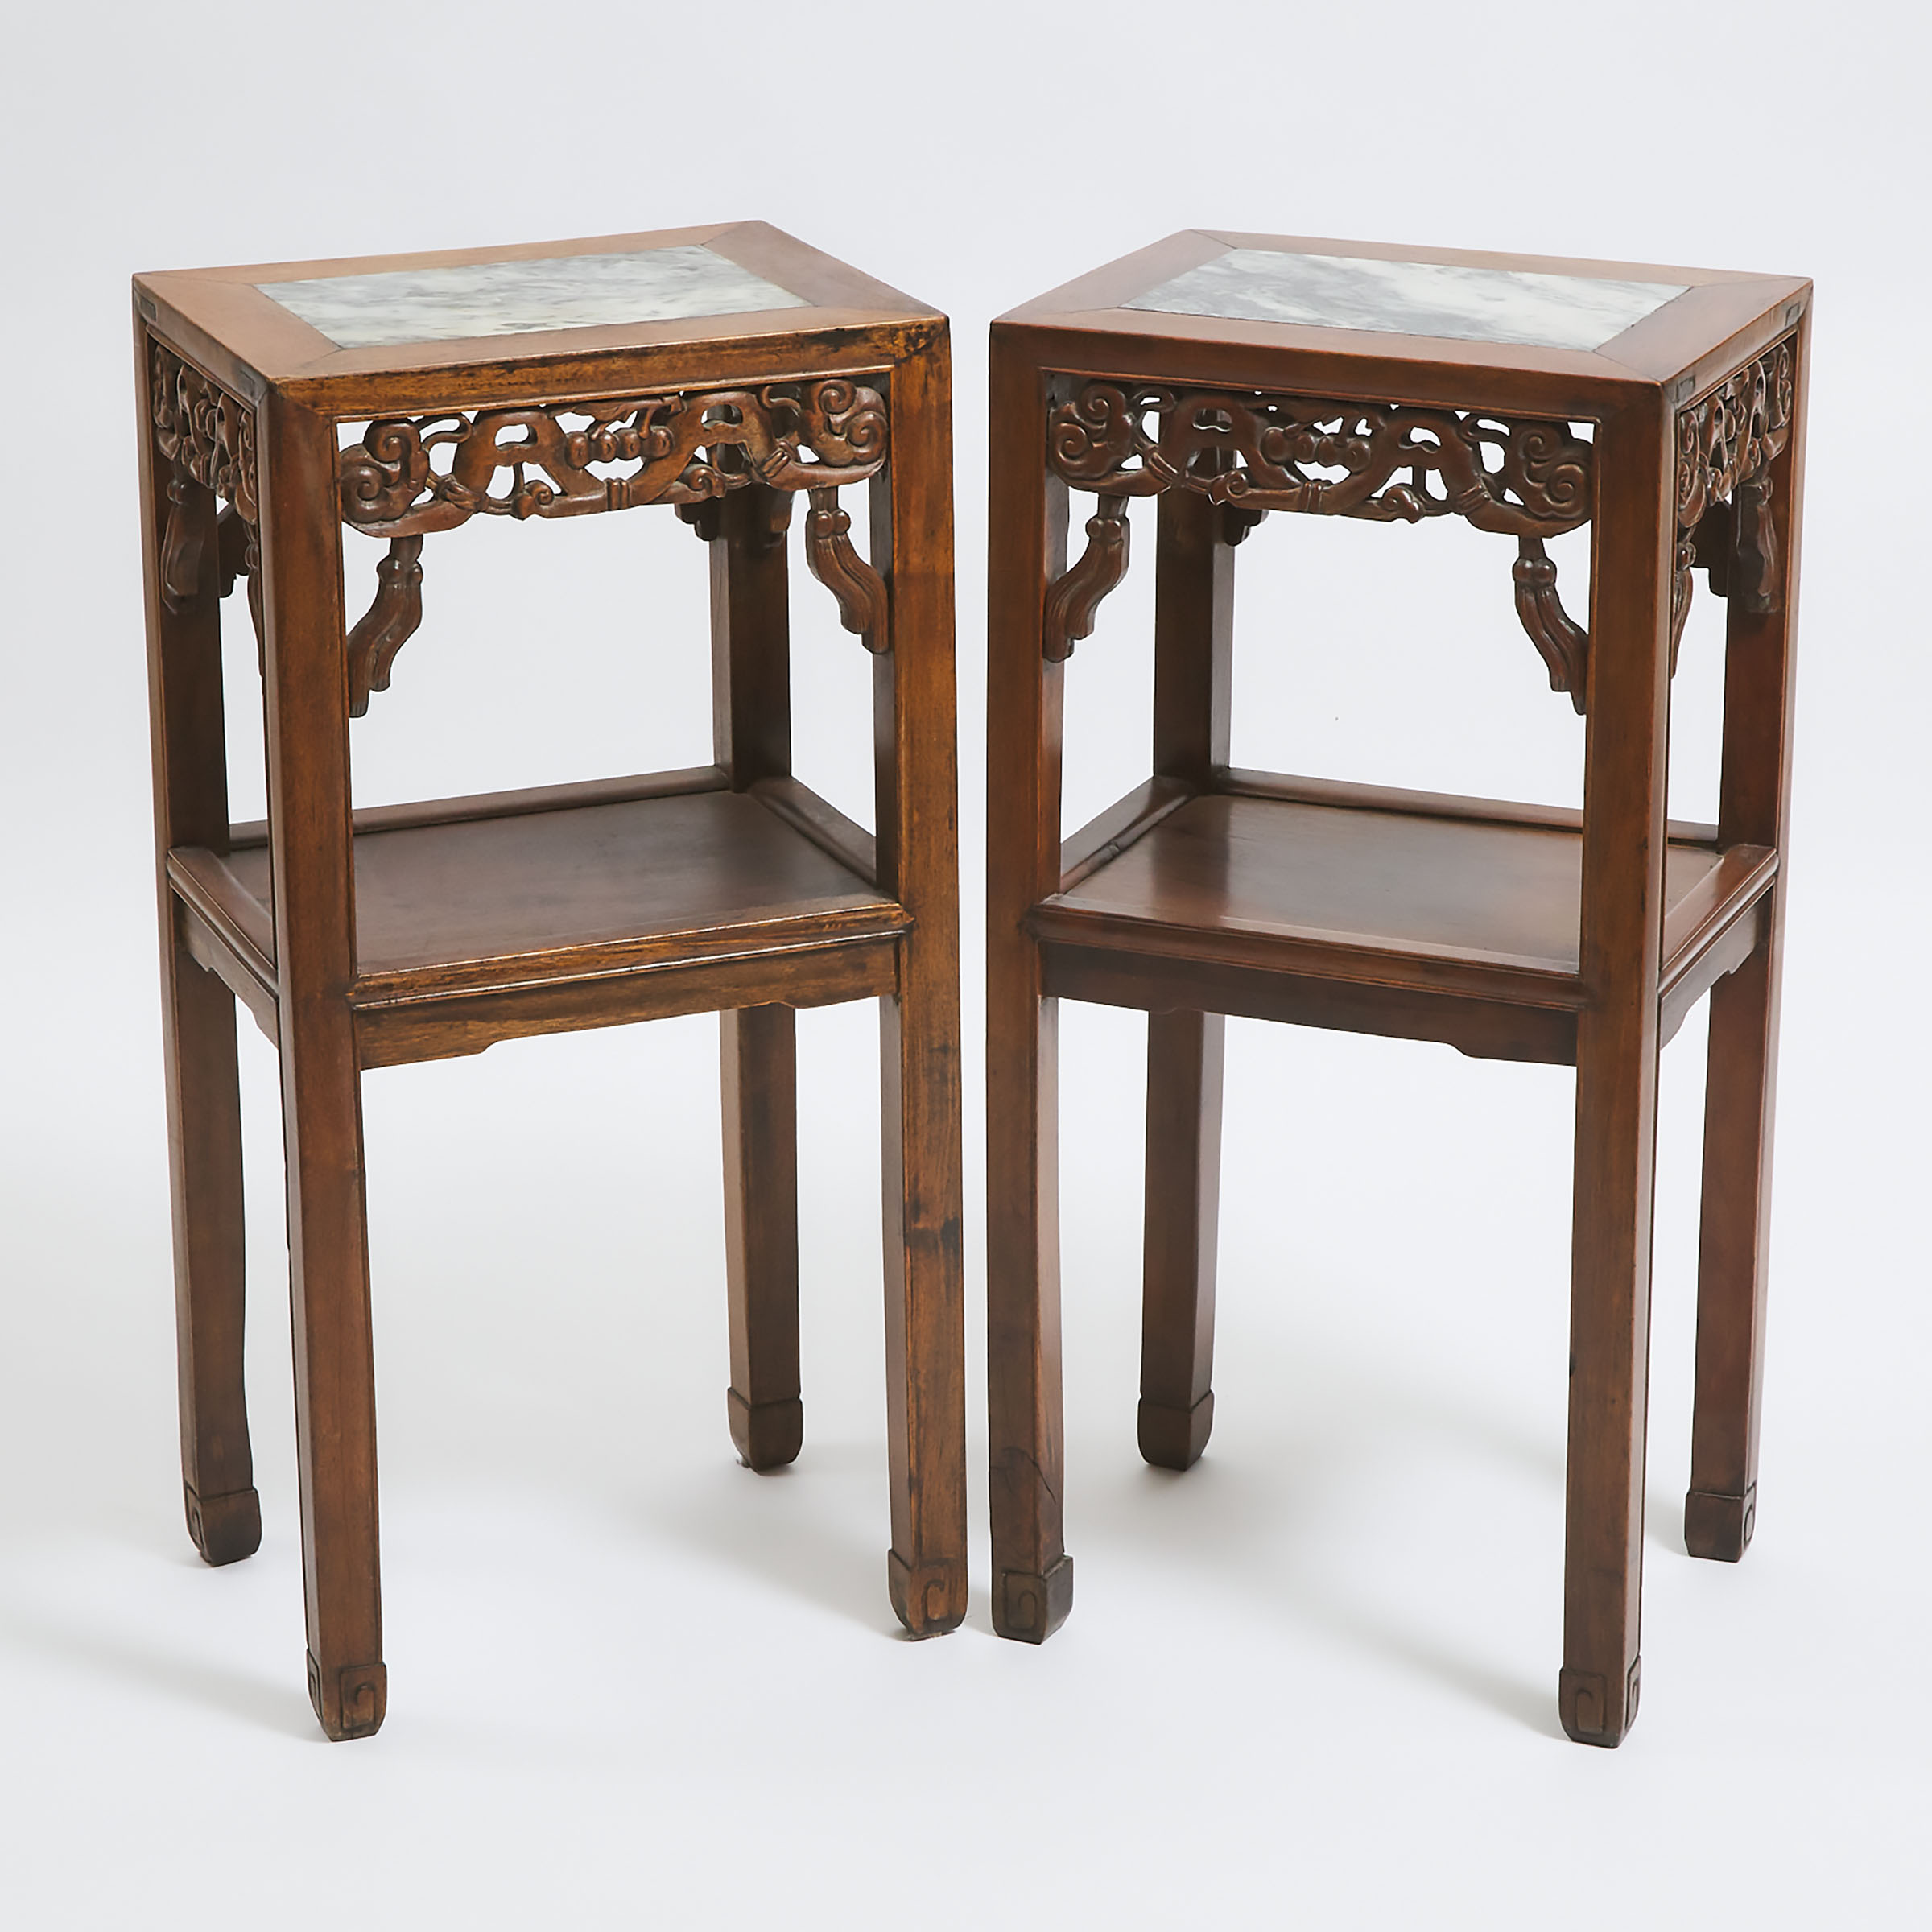 A Pair of Chinese Marble-Inset Rosewood Side Tables, Late 19th/Early 20th Century 